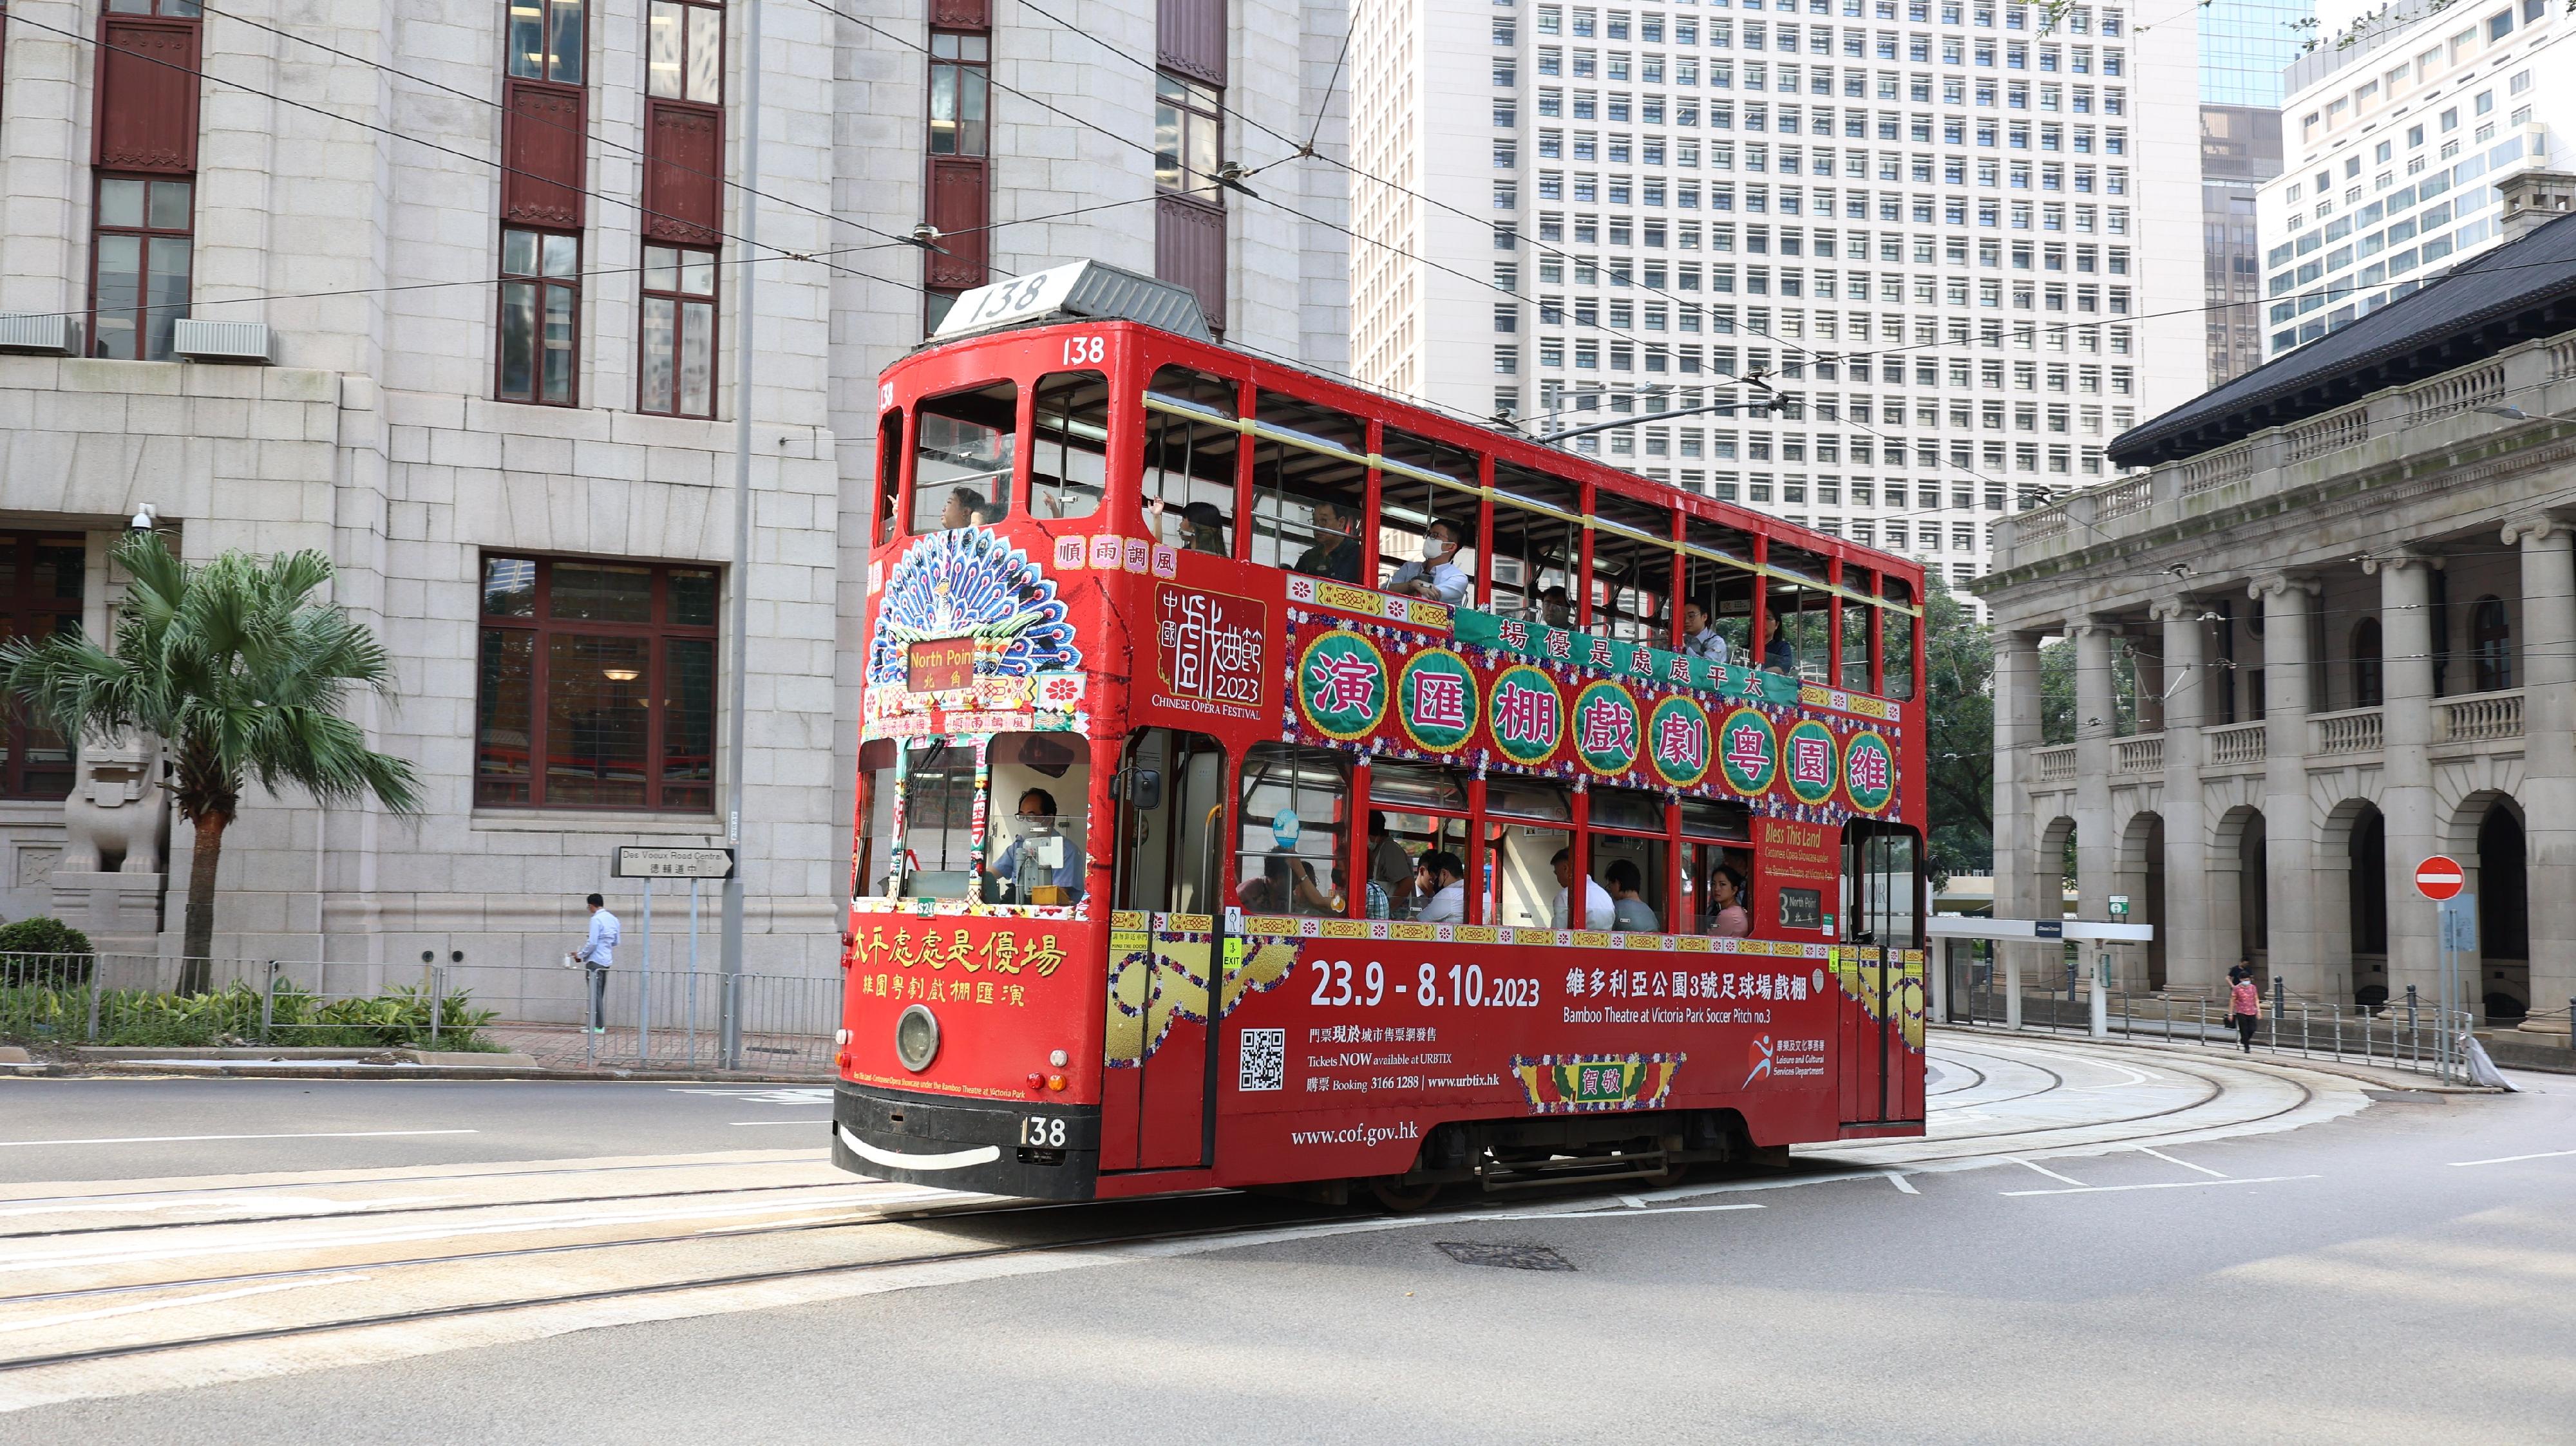 The grand finale of this year's Chinese Opera Festival, "Bless This Land - Cantonese Opera Showcase under the Bamboo Theatre at Victoria Park", opens today (September 23). Photos shows the themed tram of "Cantonese Opera Showcase under the Bamboo Theatre".